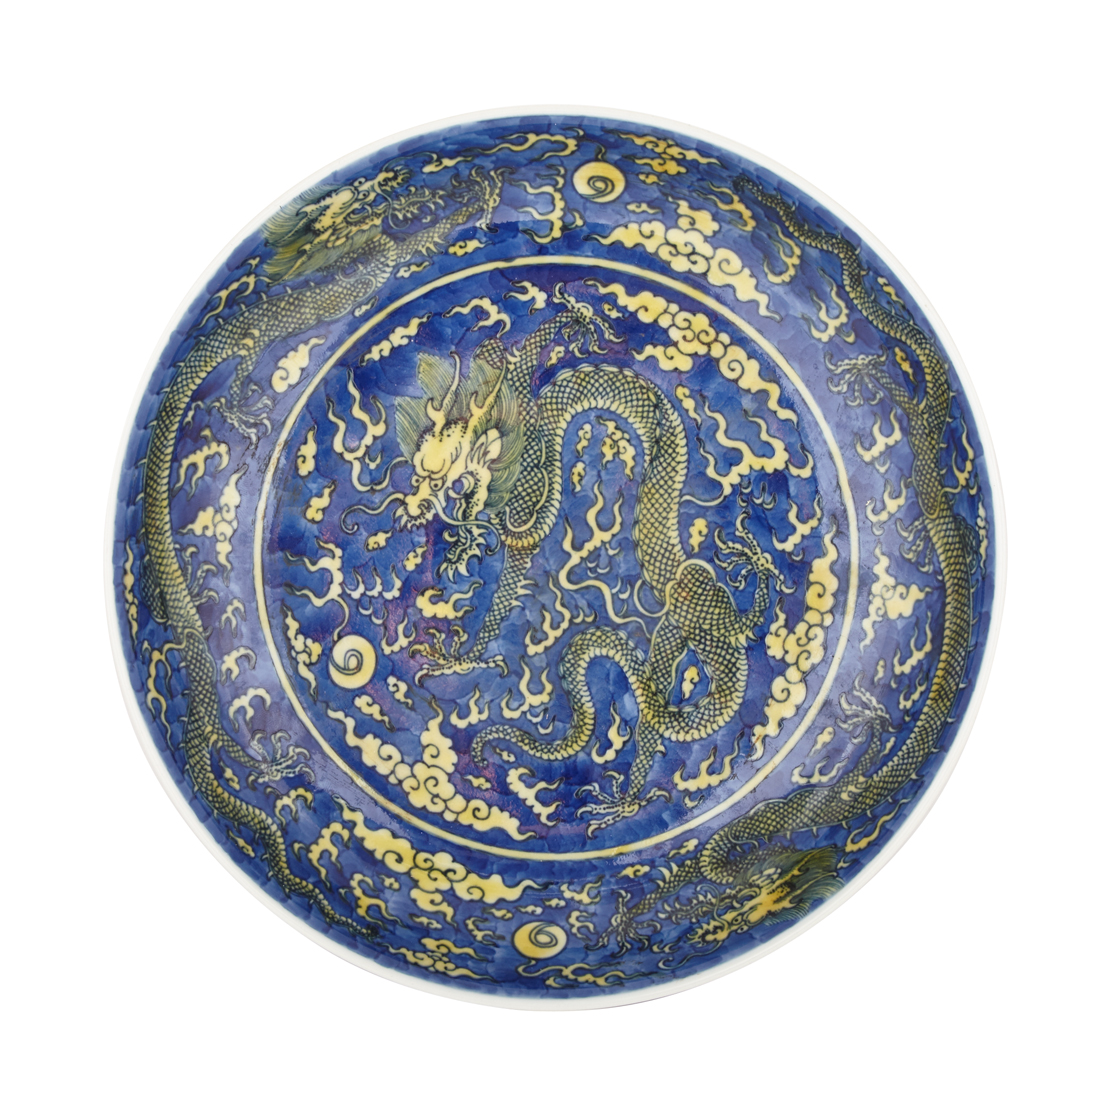 A Fine and Rare Underglaze-Blue and Yellow-Enamelled ‘Dragon’ Dish, Jiaqing Seal Mark in Underglaze Blue and Possibly of the Period (1796-1820)